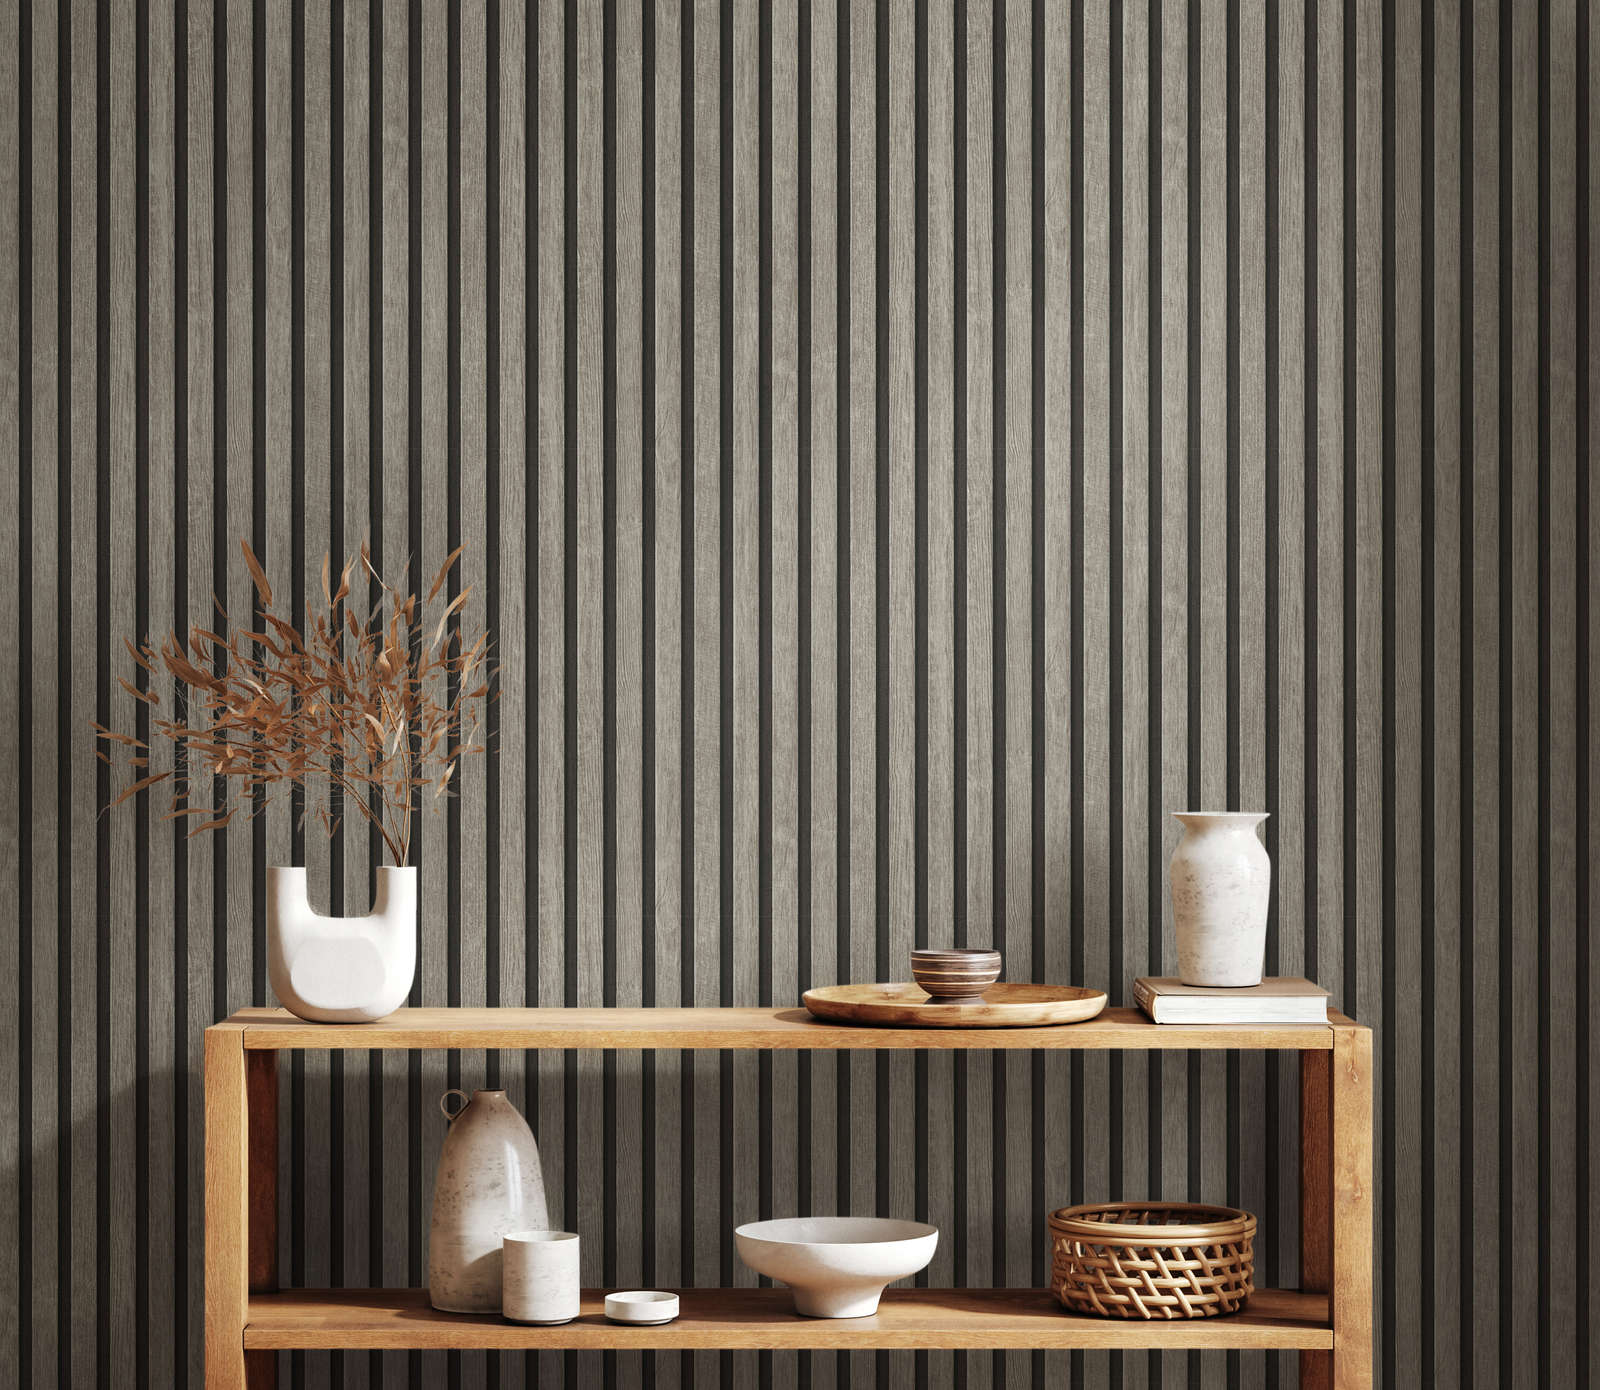             Wood panel wallpaper with fine structure - grey, black
        